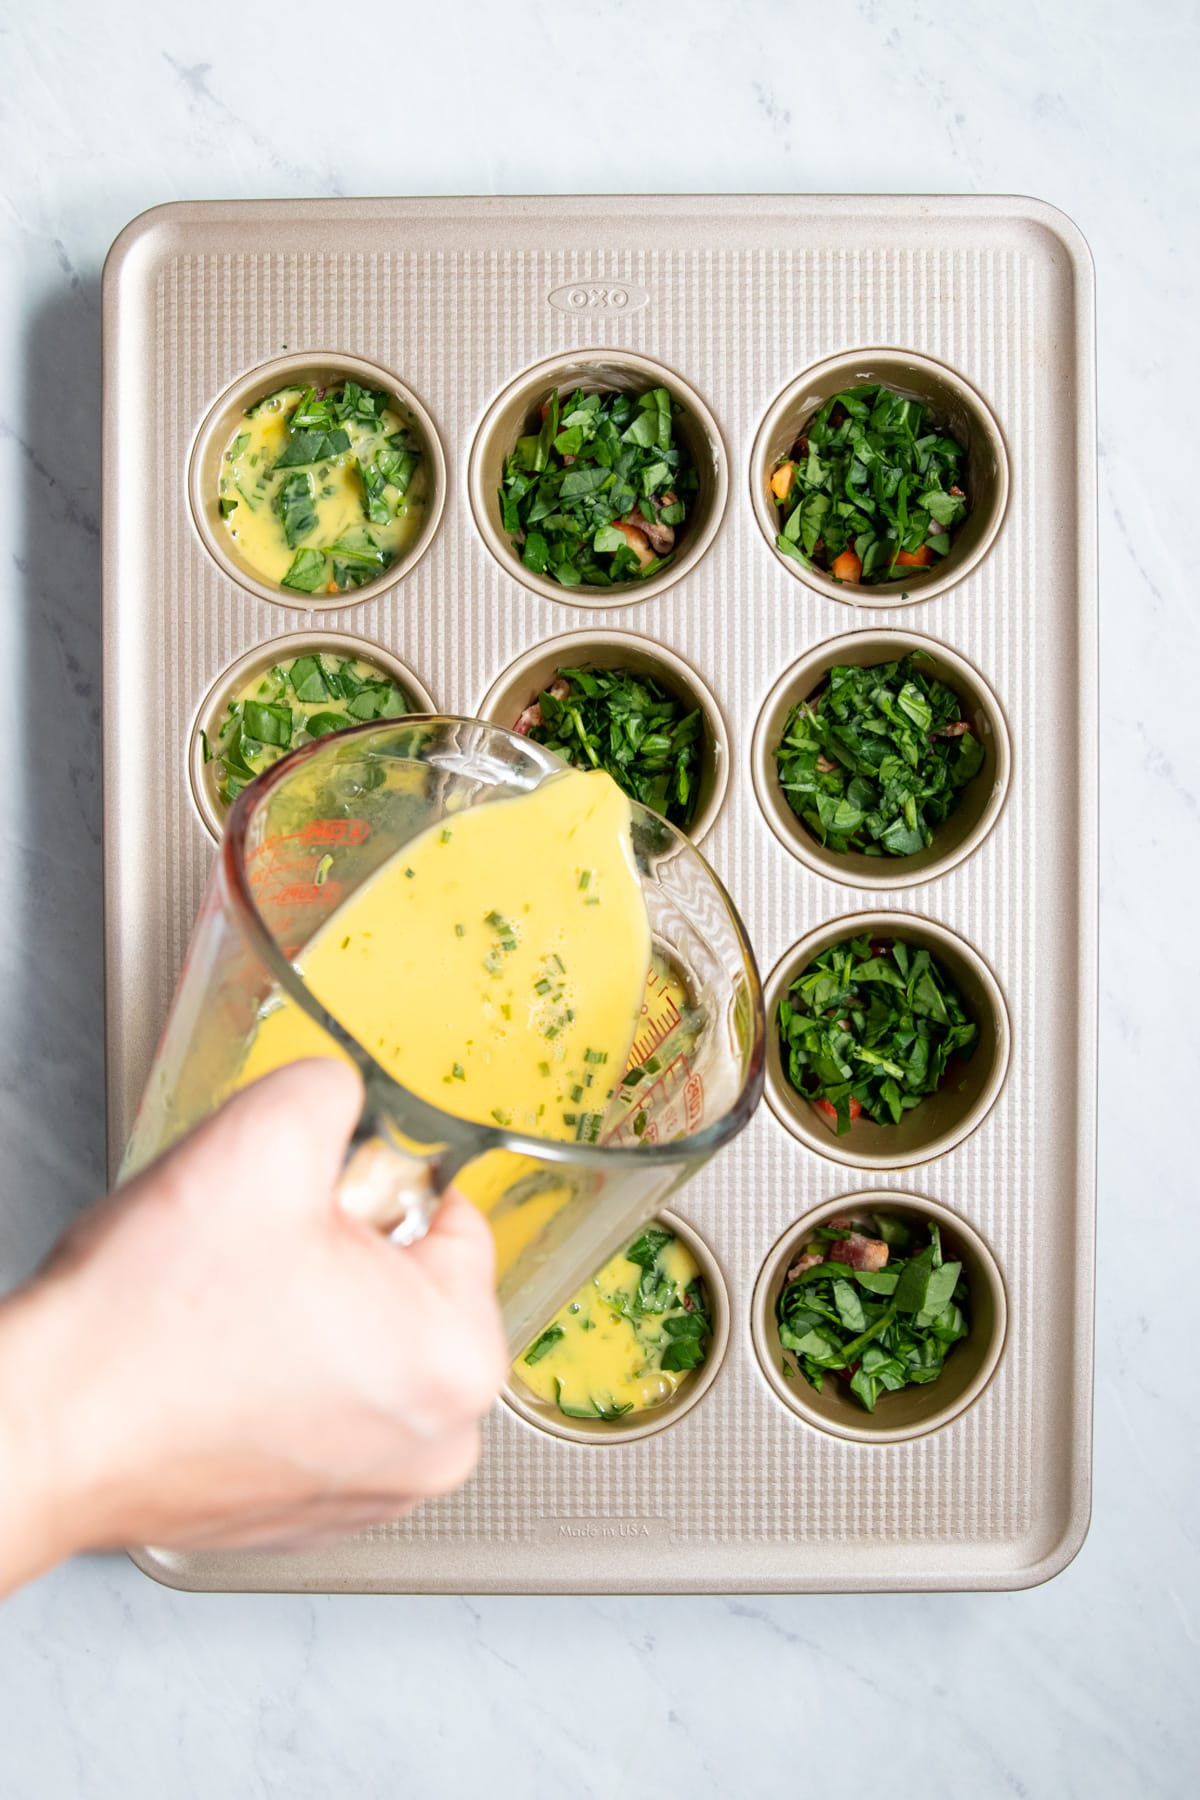 Pouring whisked egg into veggie-filled muffin tins. 